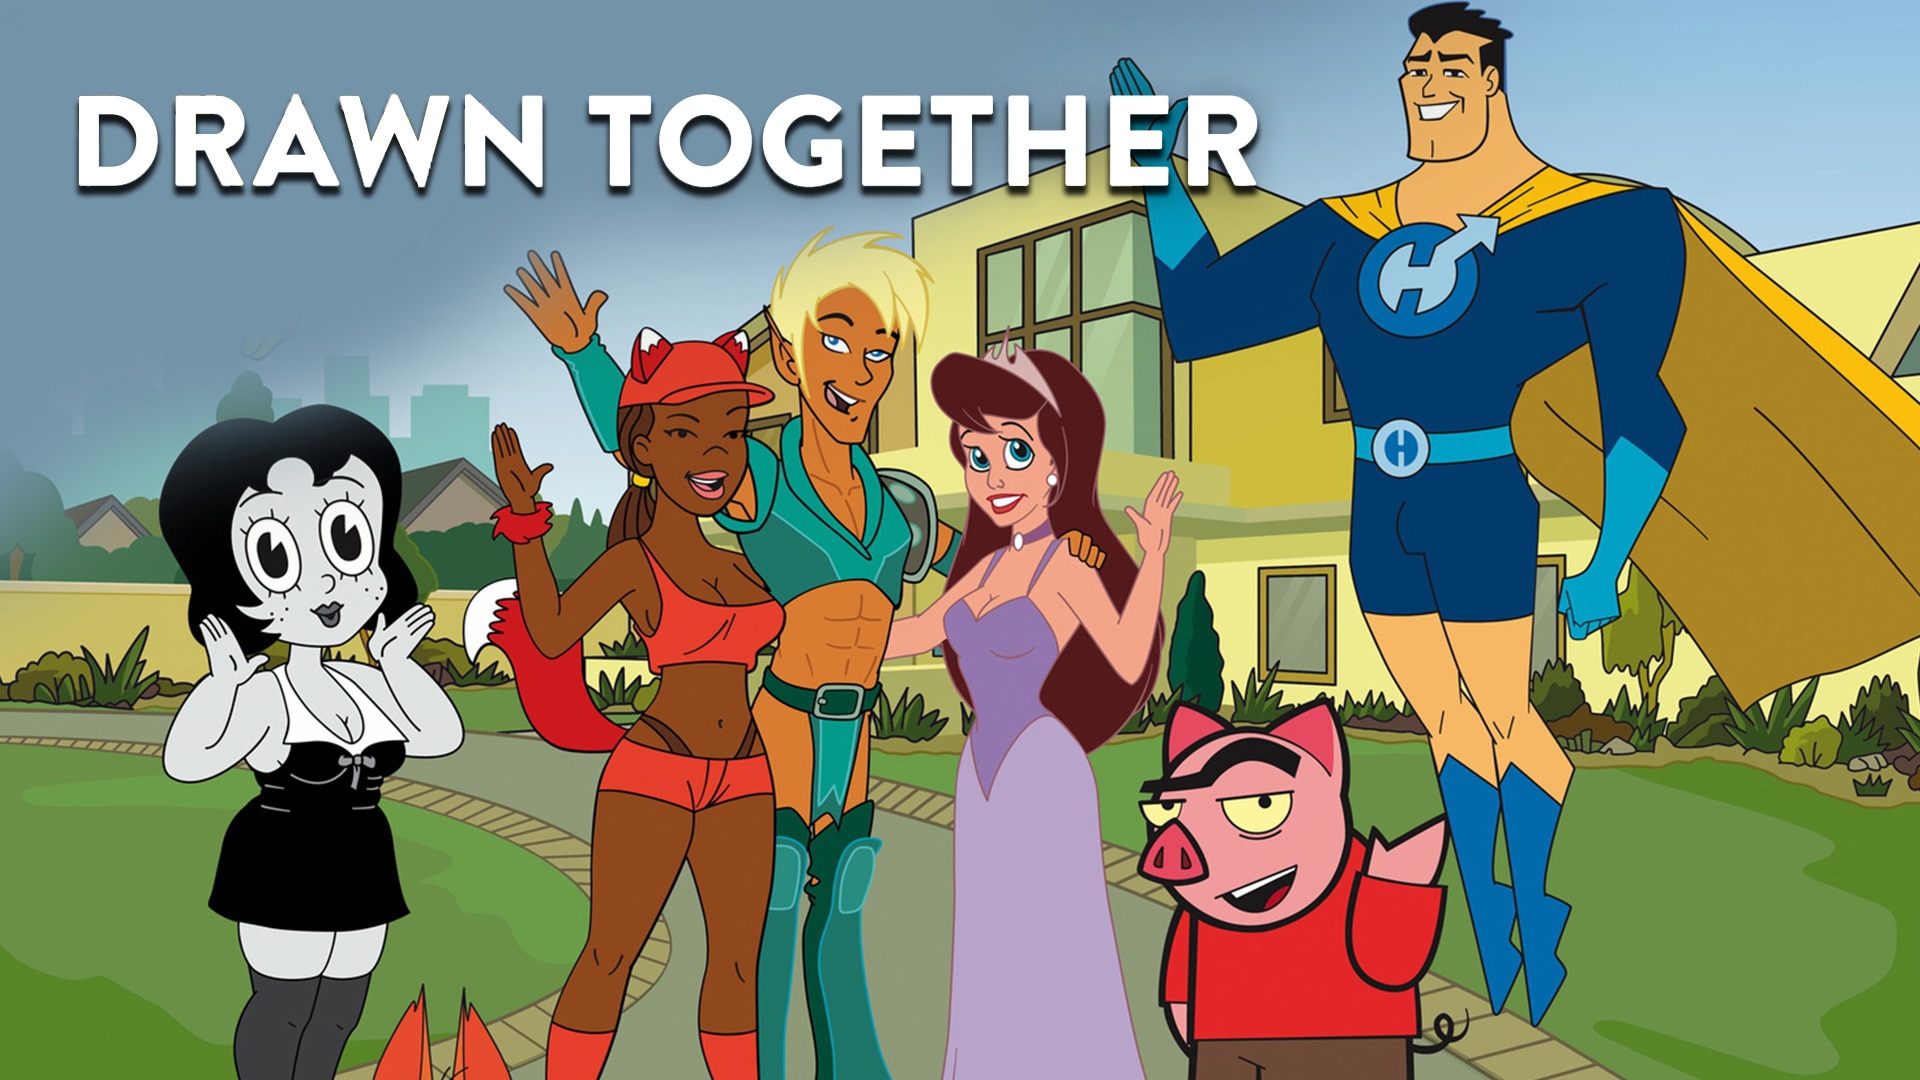 Drawn Together Watch Comedy Series Drawn Together Full Episodes Online Voot Select